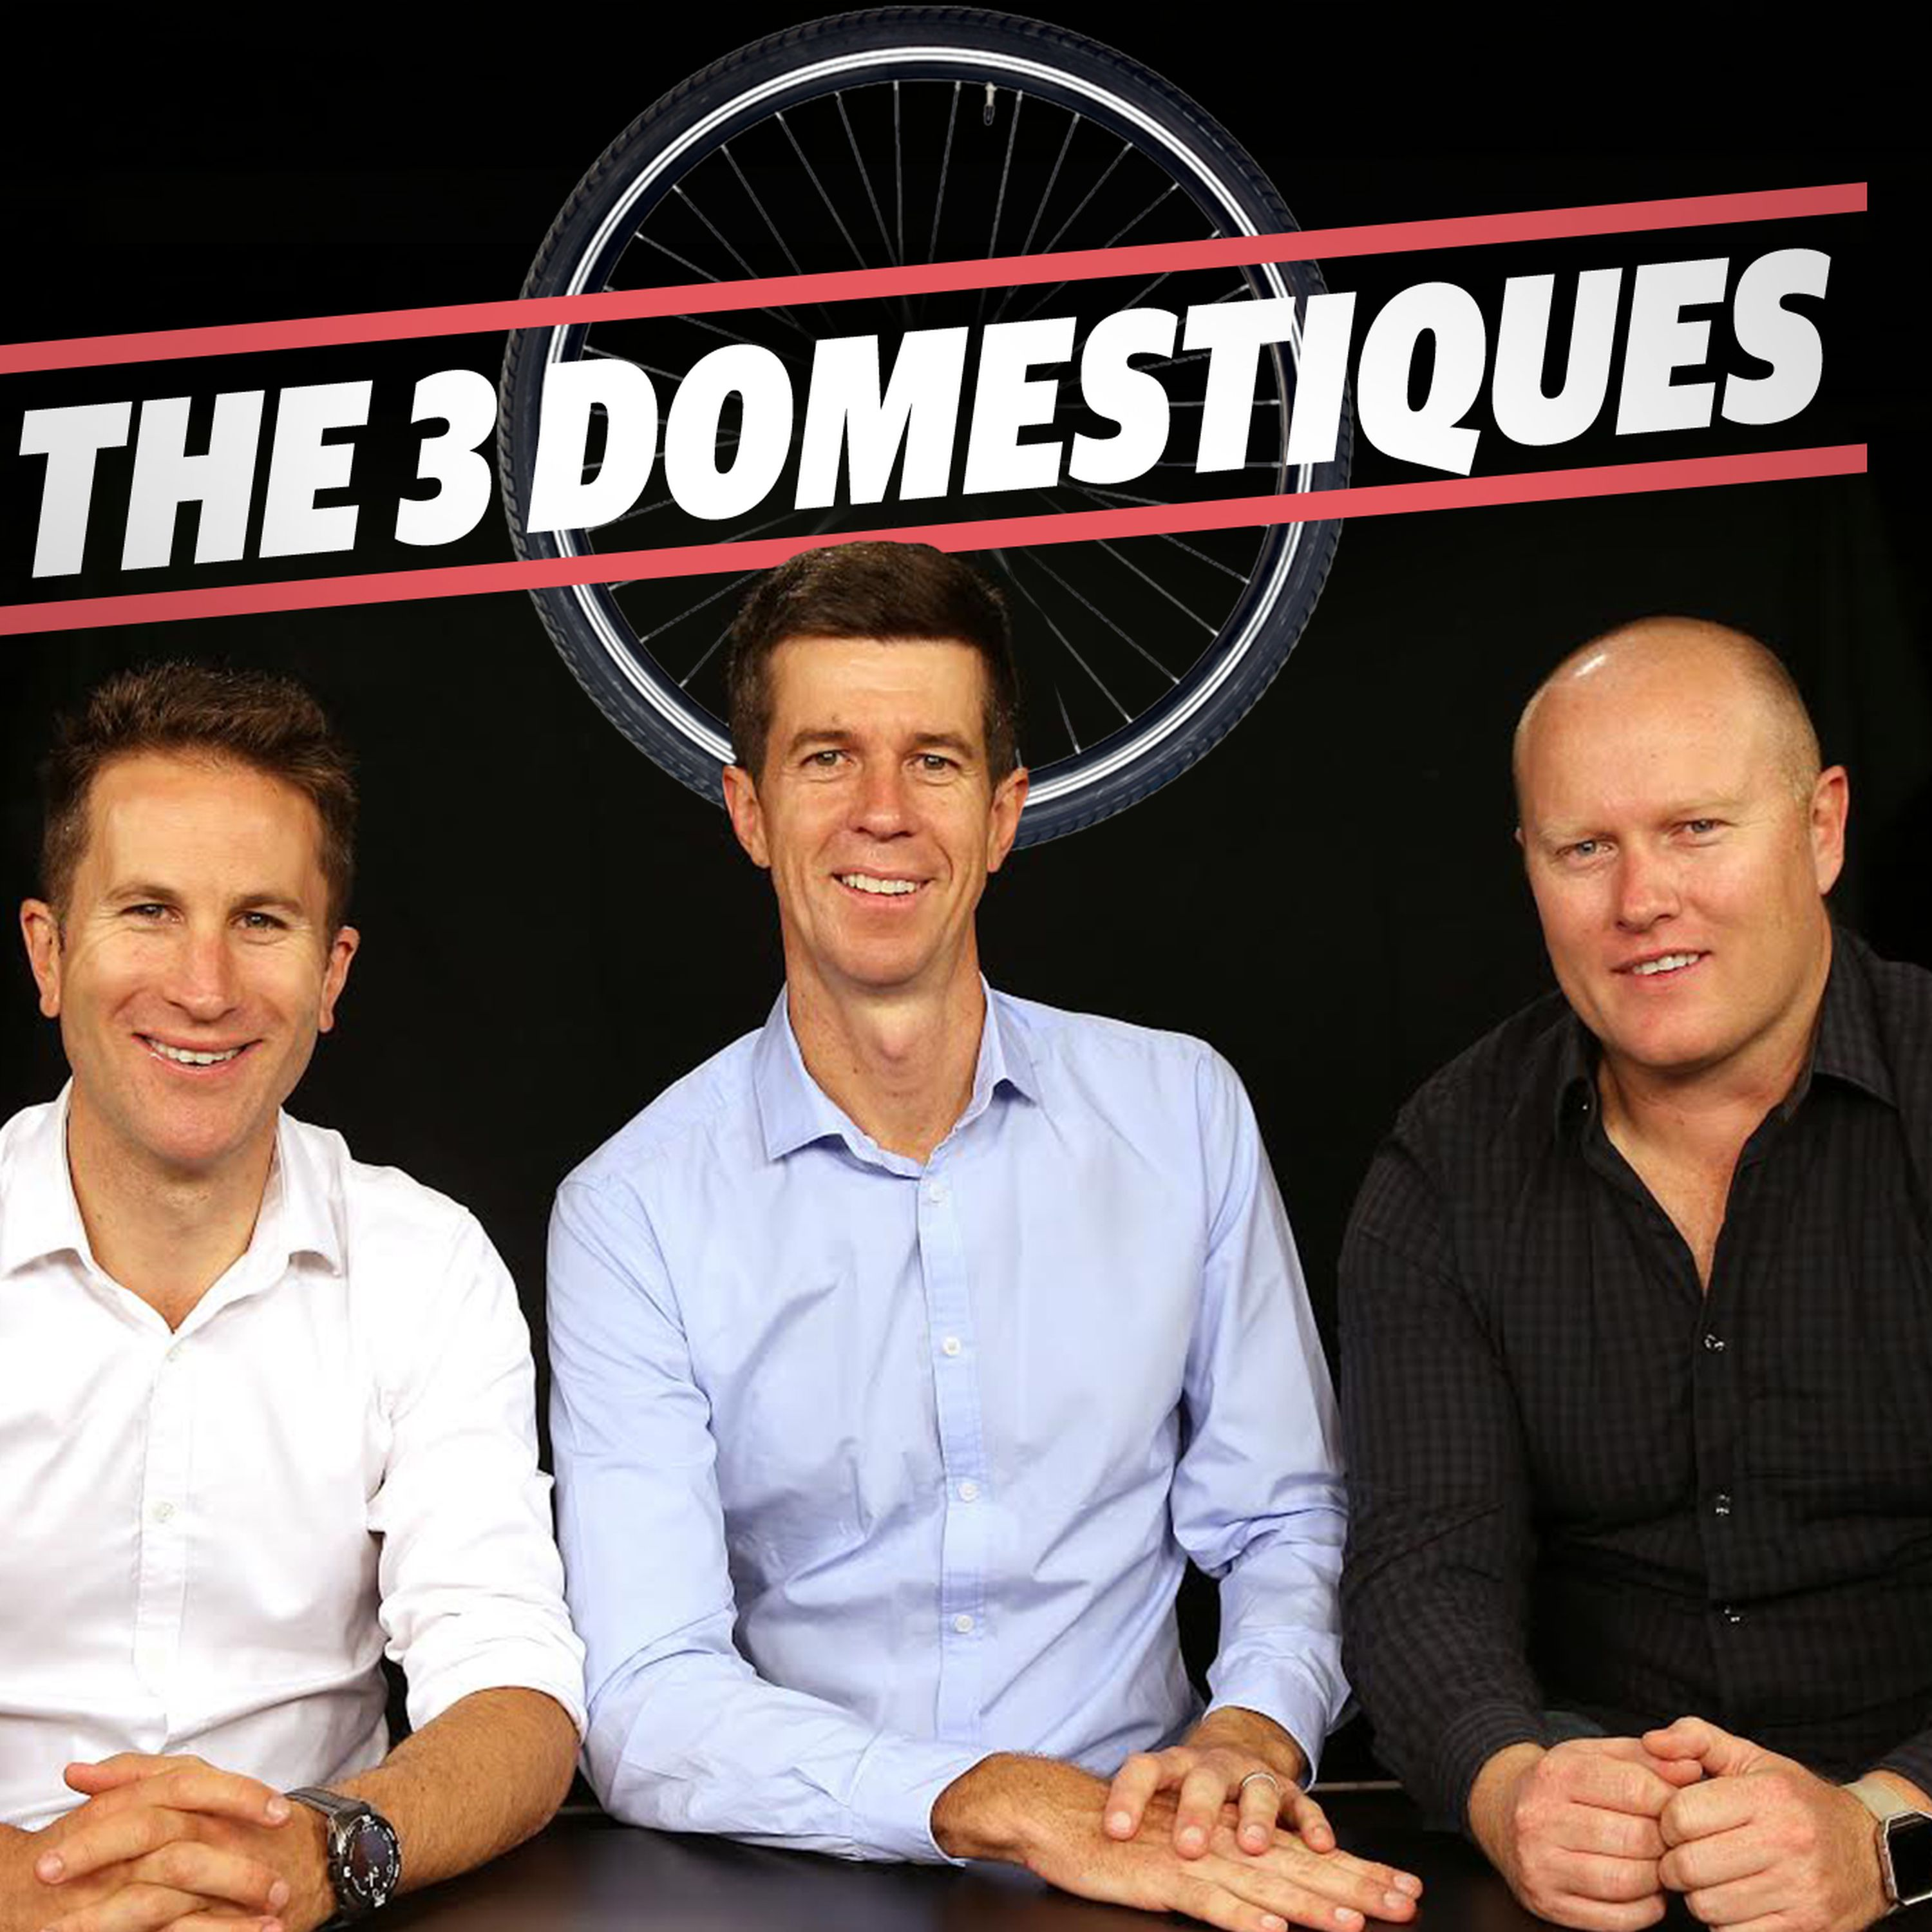 Episode 10: The Real Domestiques - "The Joker" and "Heppy" take you inside the pro peloton in a special edition of The 3 Domestiques